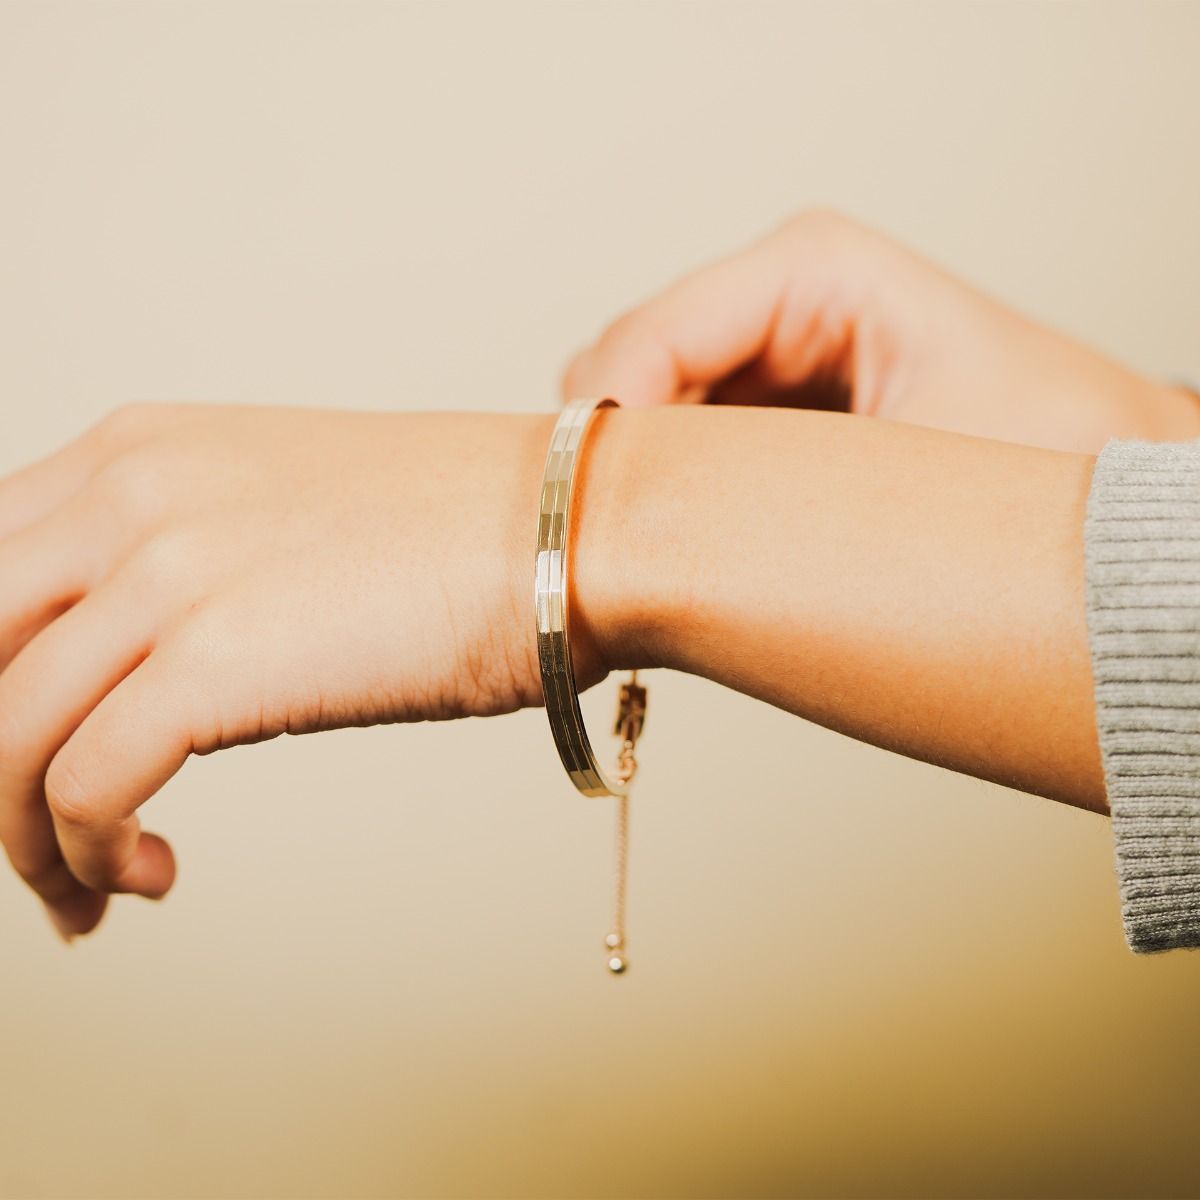 Inspired by the bustle and fun of the city, this striking bangle allows you to add style to any outfit. Featuring a modern take on a classic friendship bracelet design, with a faceted finish to accentuate the shine. 